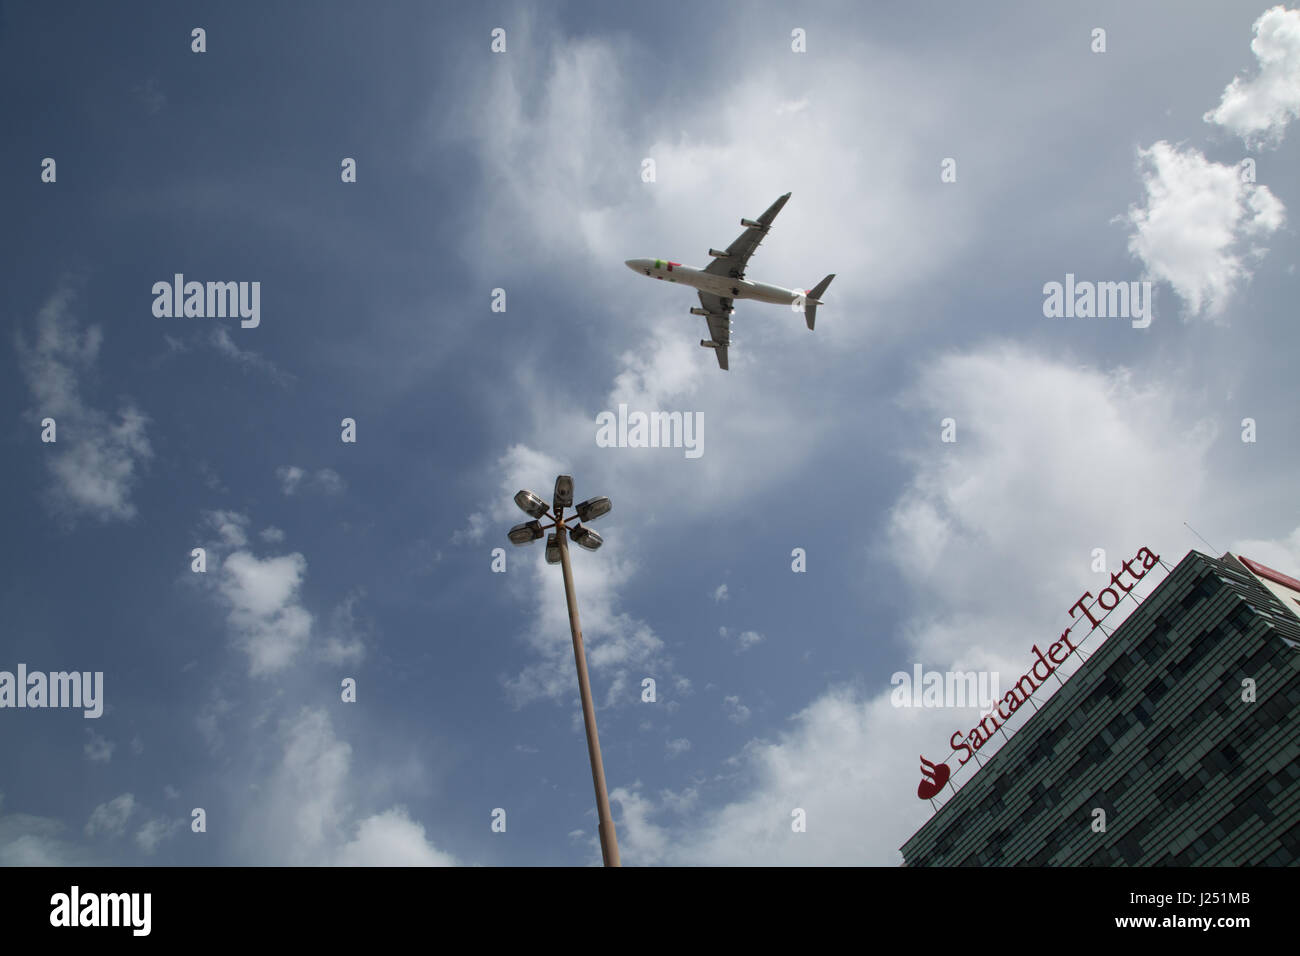 An aeroplane flying low over a hotel in Lisbon. Portugal. Stock Photo